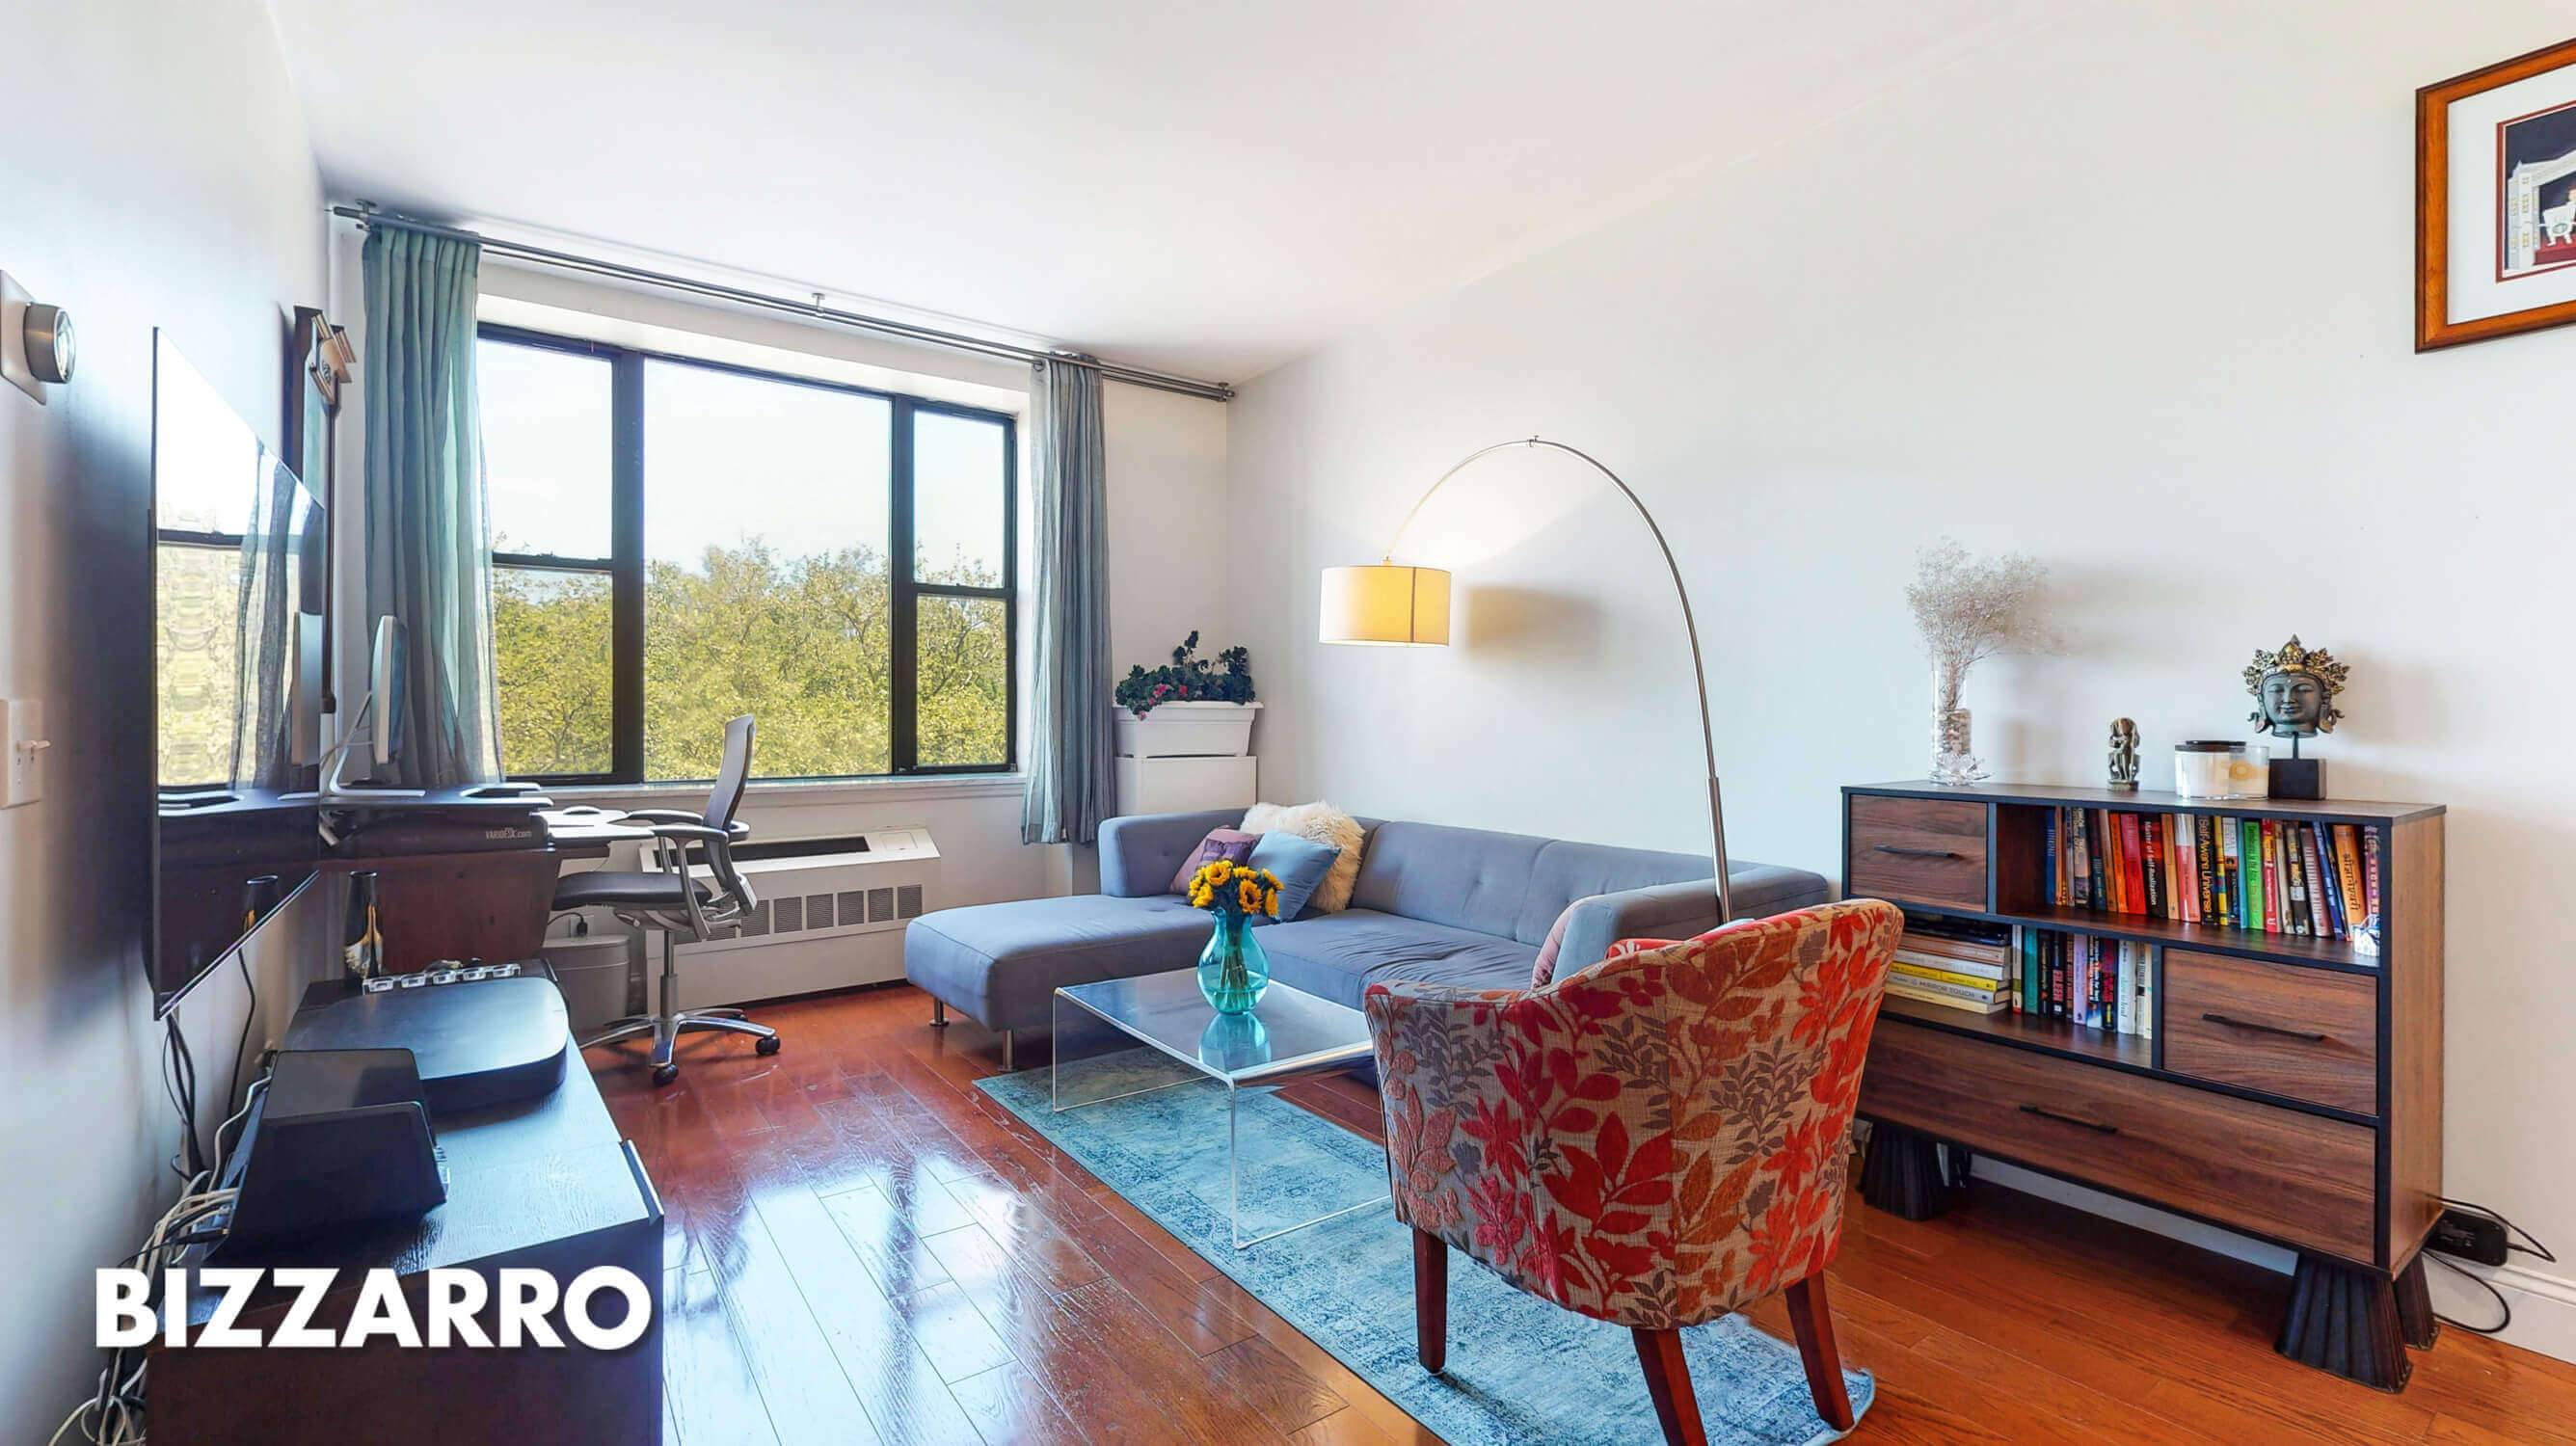 Aside from its interior charms, this Hamilton Heights condo in the Hamilton Parc building at 504 West 136th Street has two great things going for it, and they're both right ...